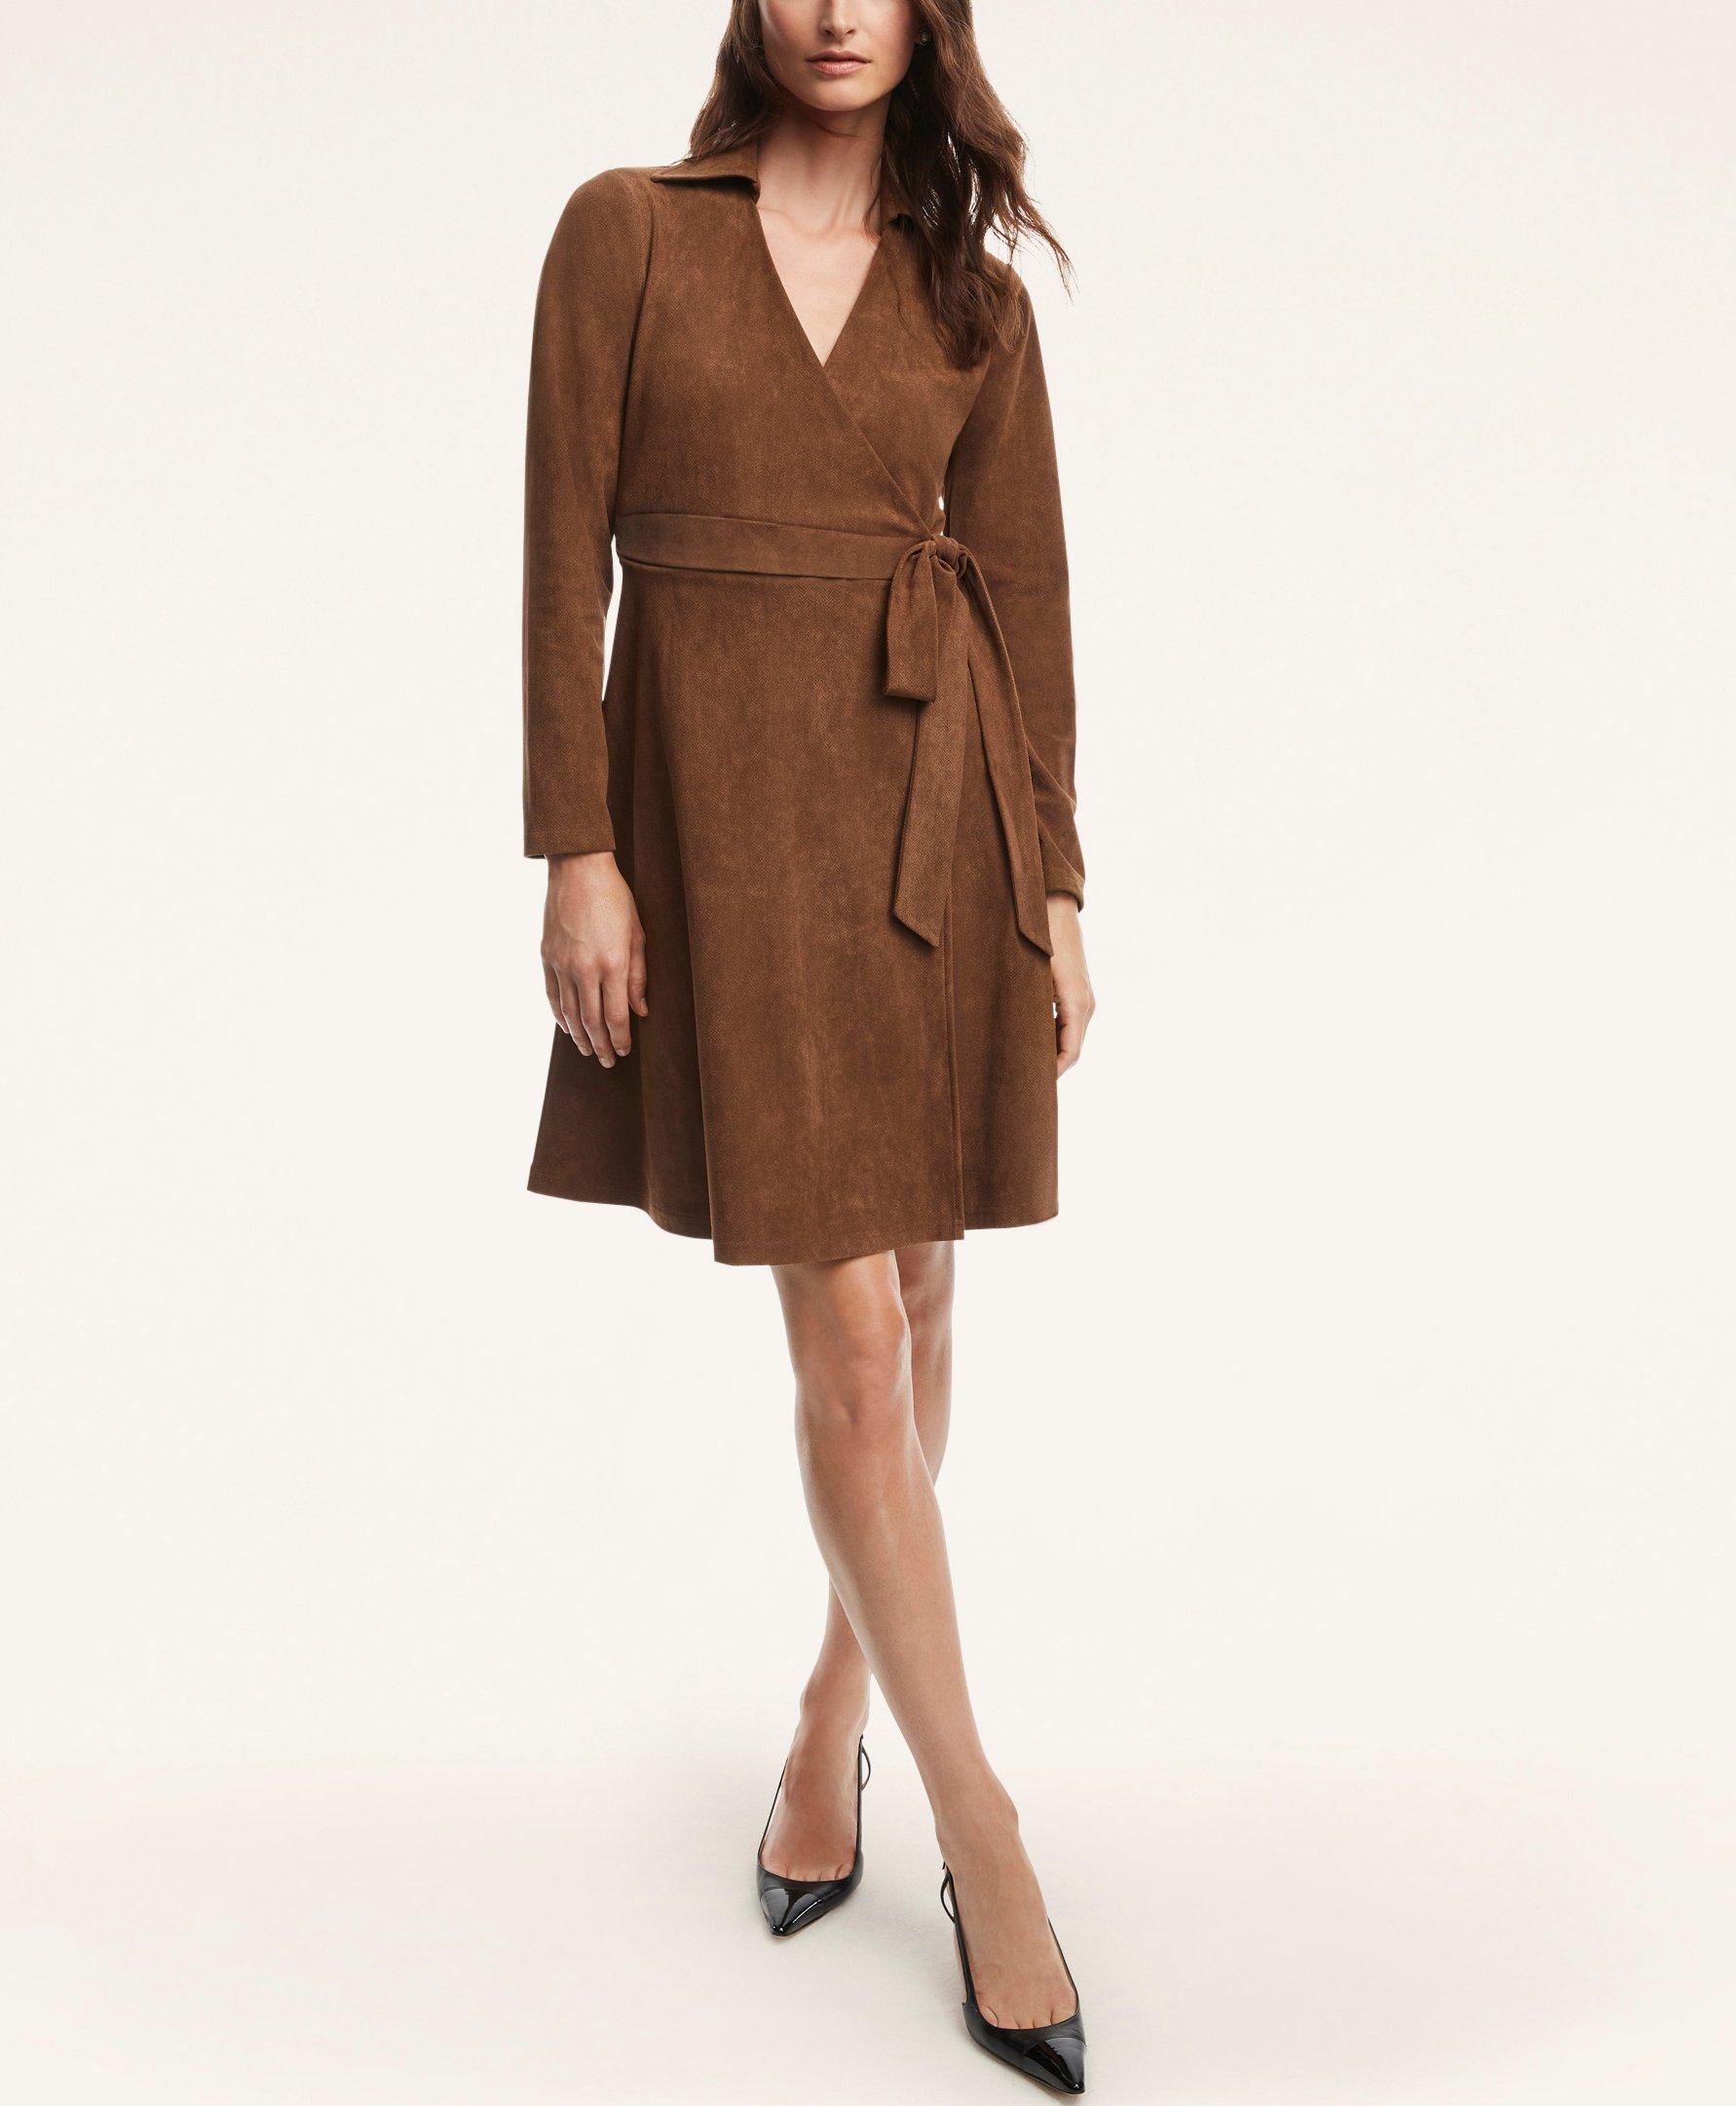 Shop Brooks Brothers Faux Suede Herringbone Wrap Dress | Brown | Size Small